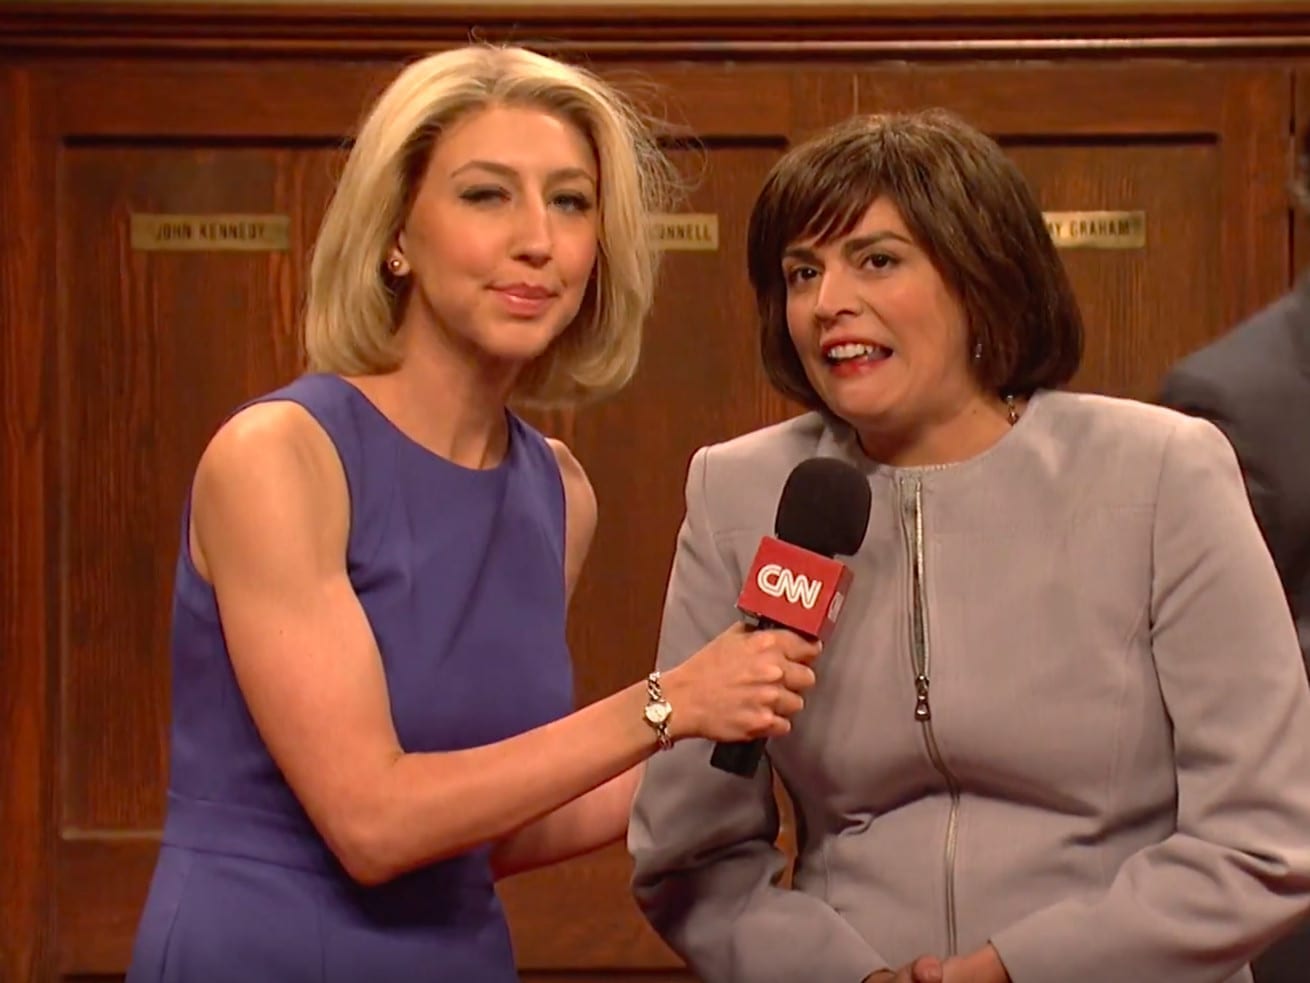 SNL tries — and fails — to find humor in Kavanaugh’s Supreme Court confirmation